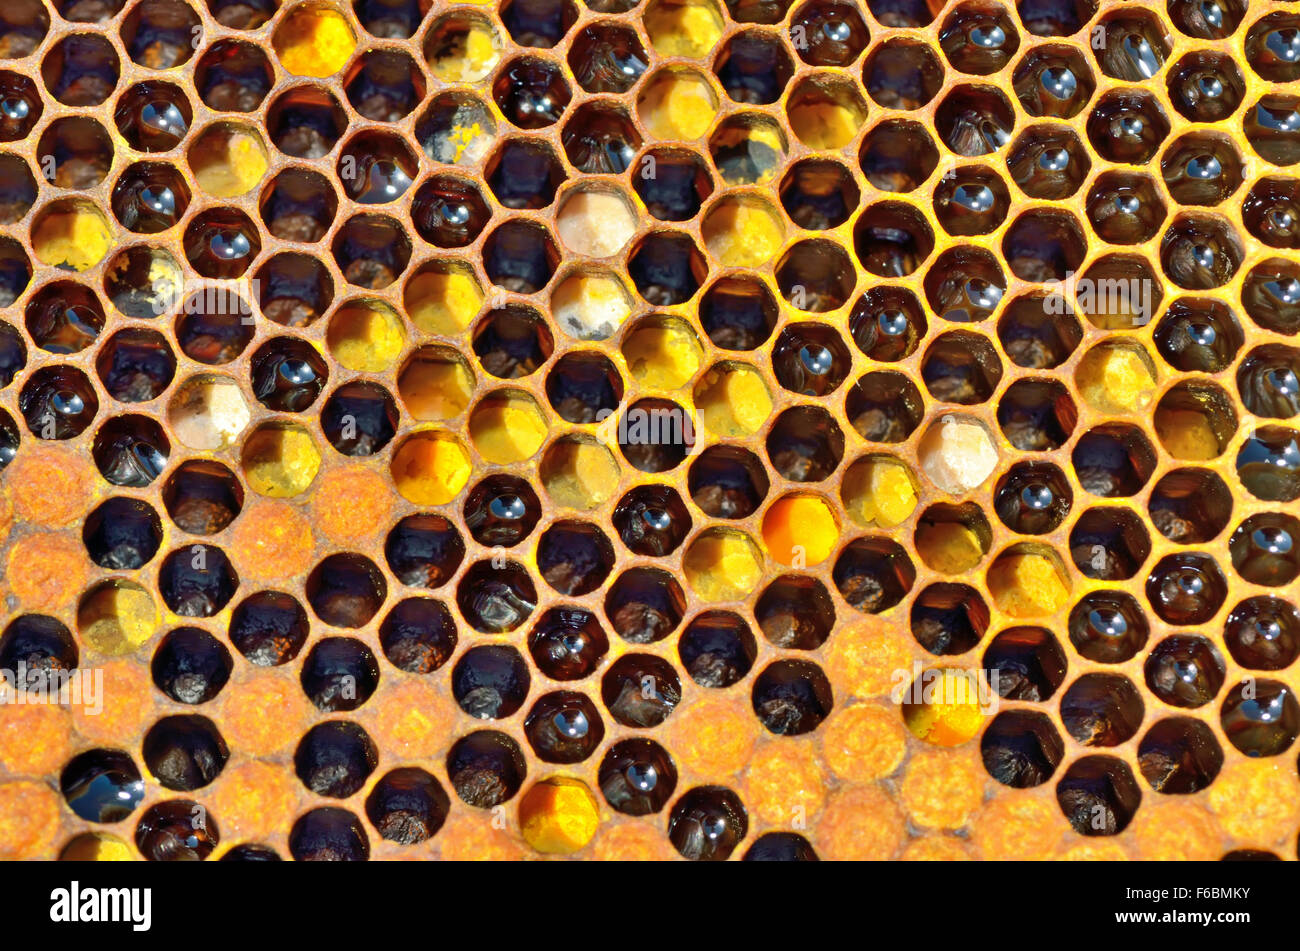 unfinished honey and wax in honeycombs Stock Photo